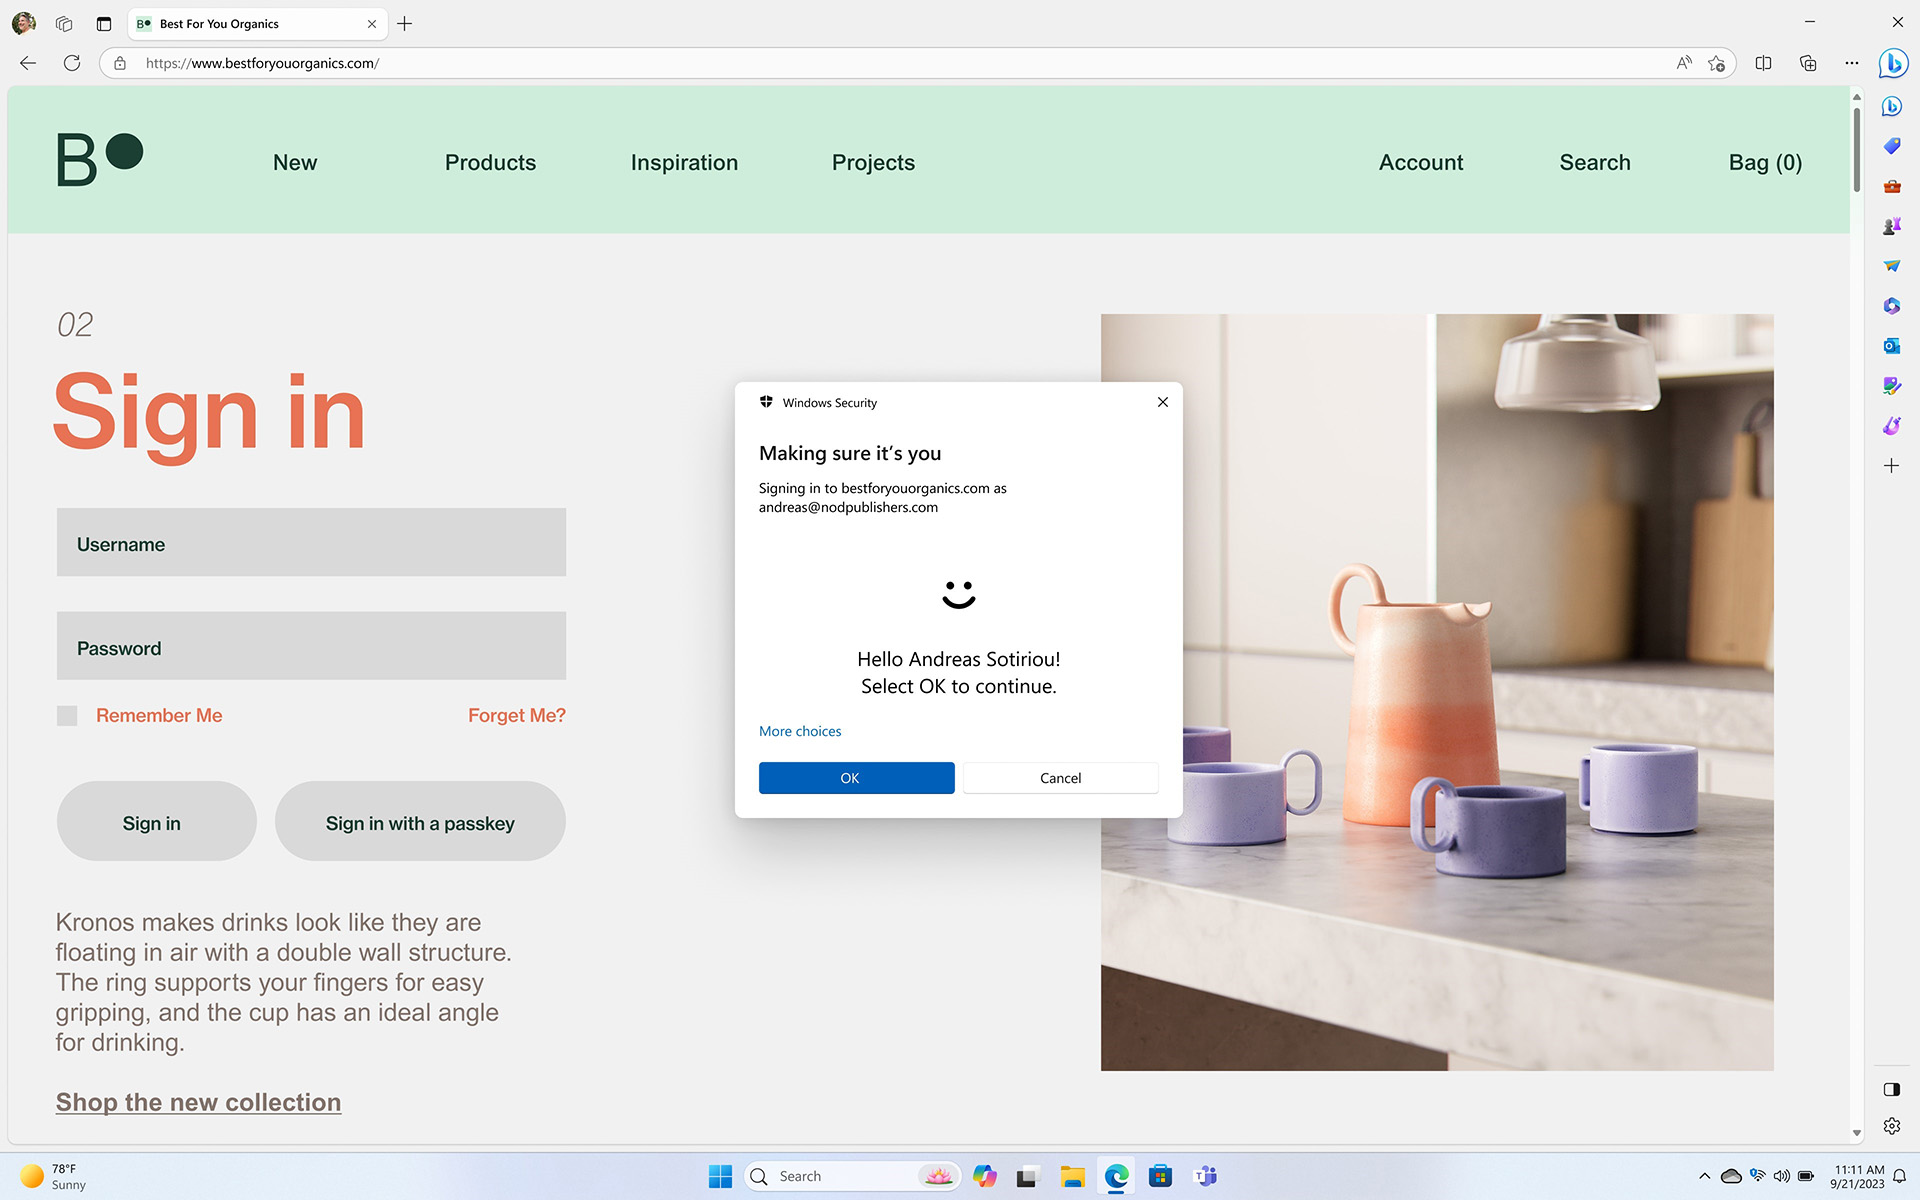 Screenshot of Windows Hello dialog box on top of a website sign-in prompt